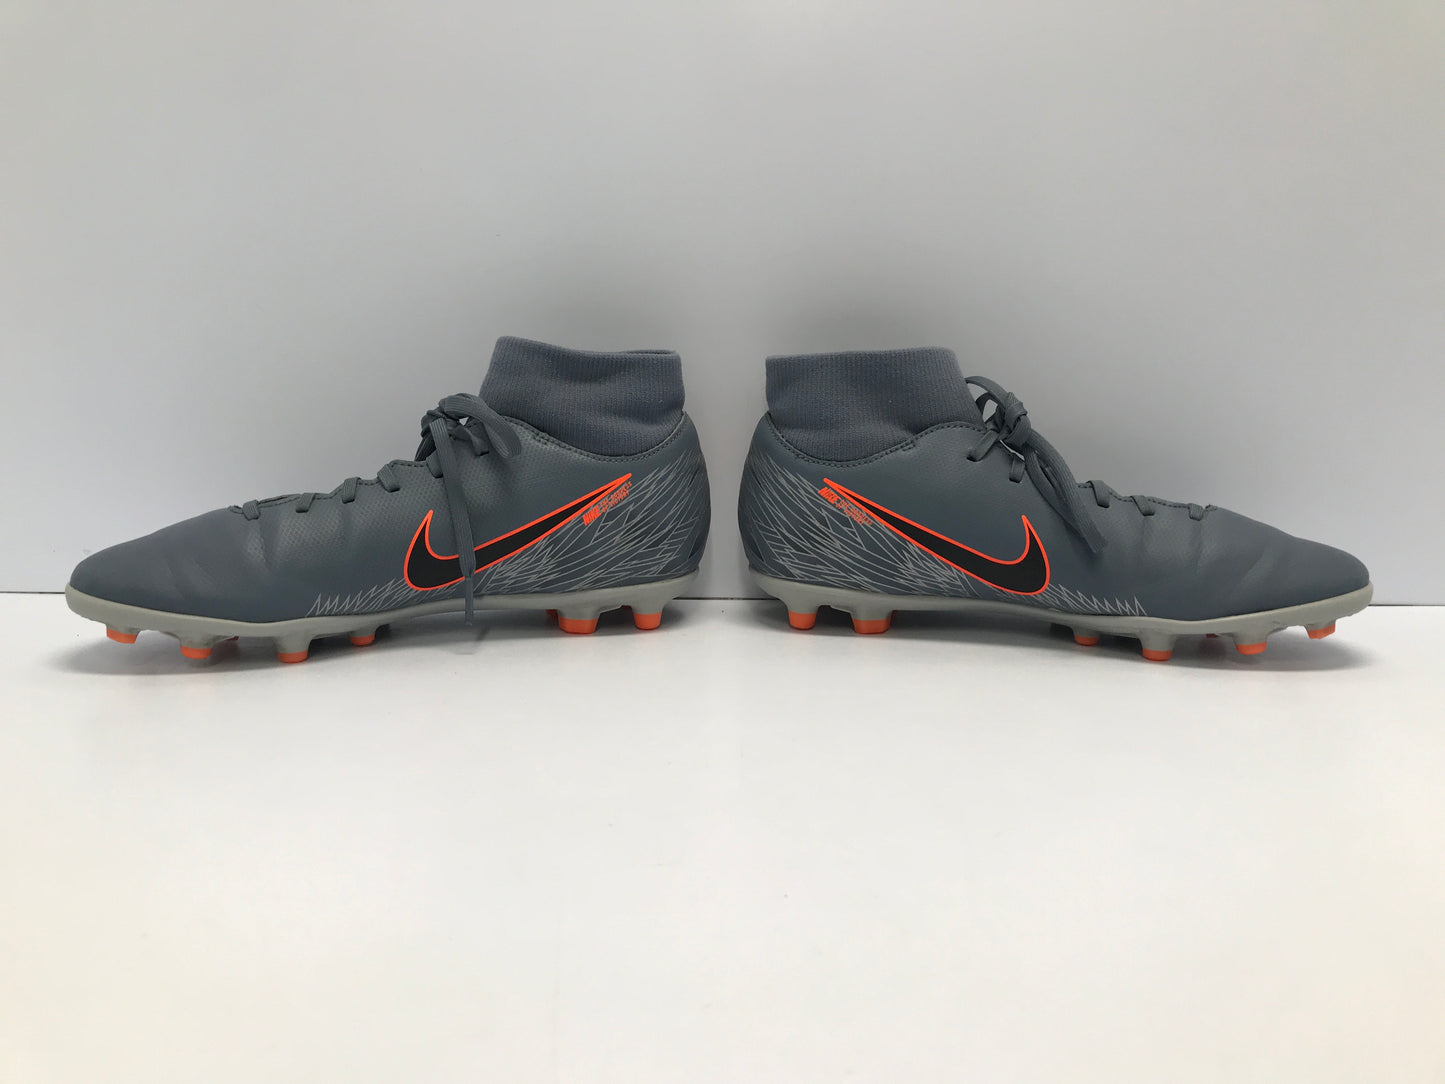 Soccer Shoes Cleats Men's Size 8.5 Nike Mercurial With Slipper Foot Grey Orange Excellent